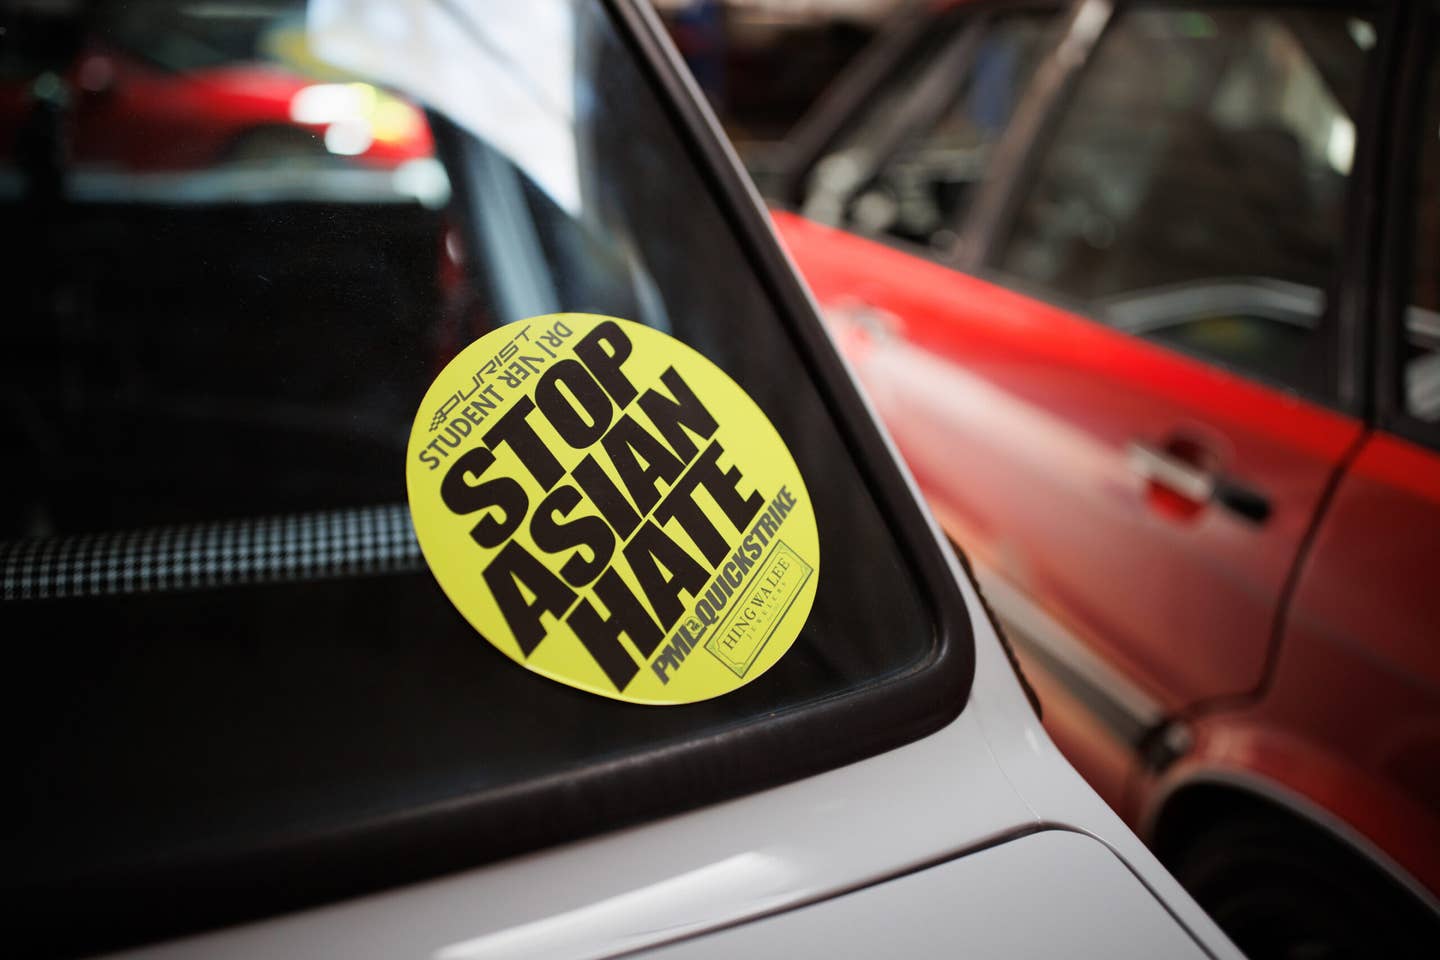 A Stop Asian Hate sticker.